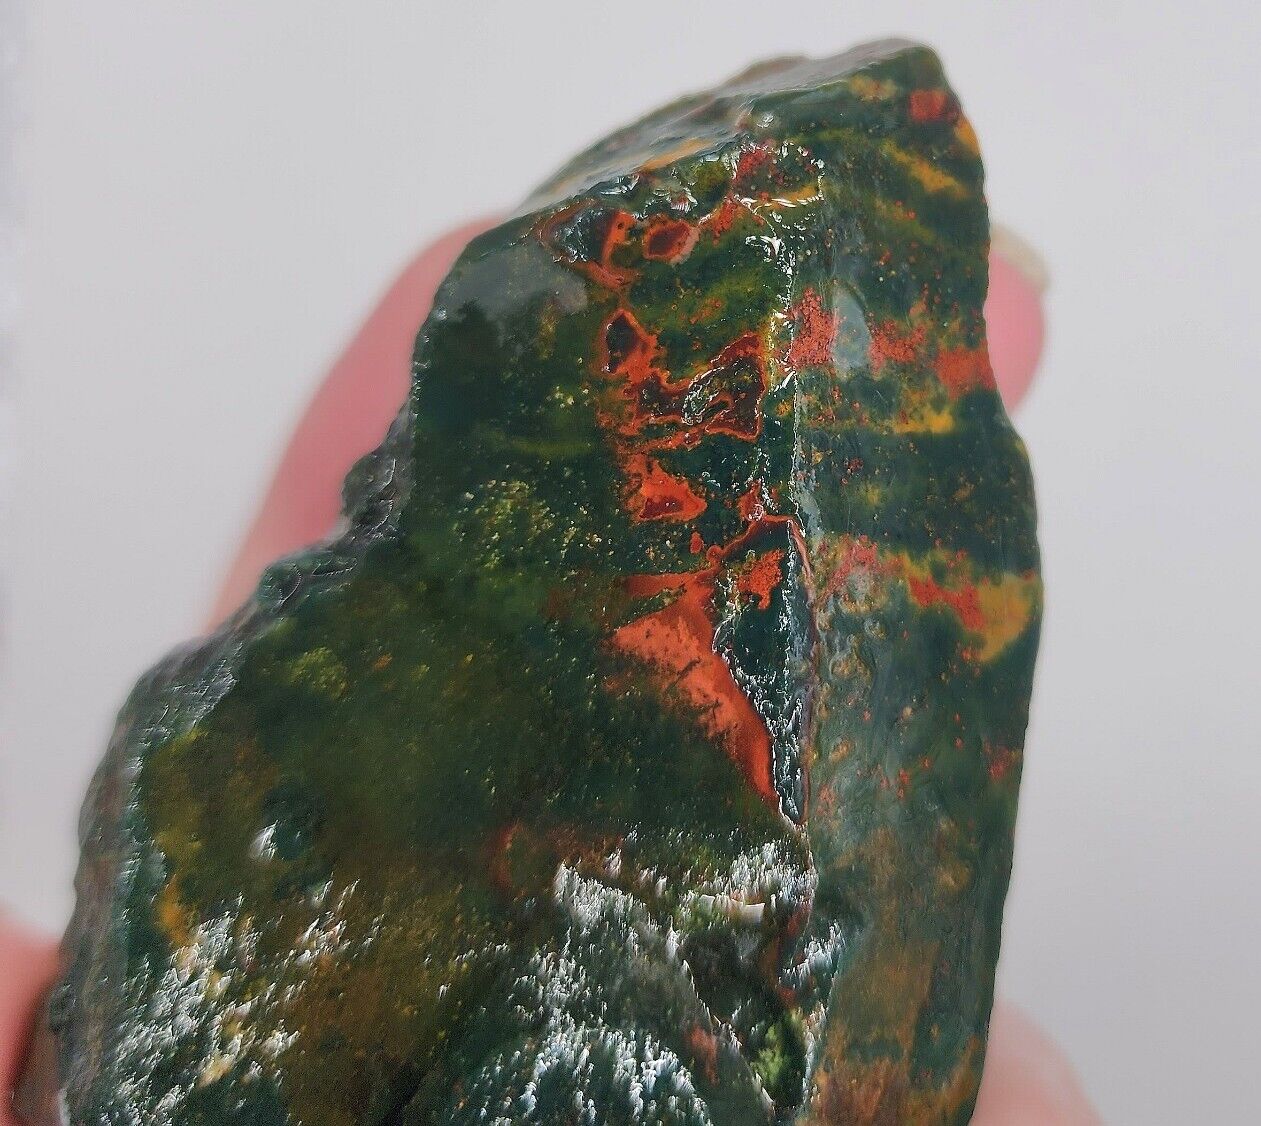 Bloodstone Heliotrope 10oz OLD STOCK Lapidary Rough - Stunning Colorful Material